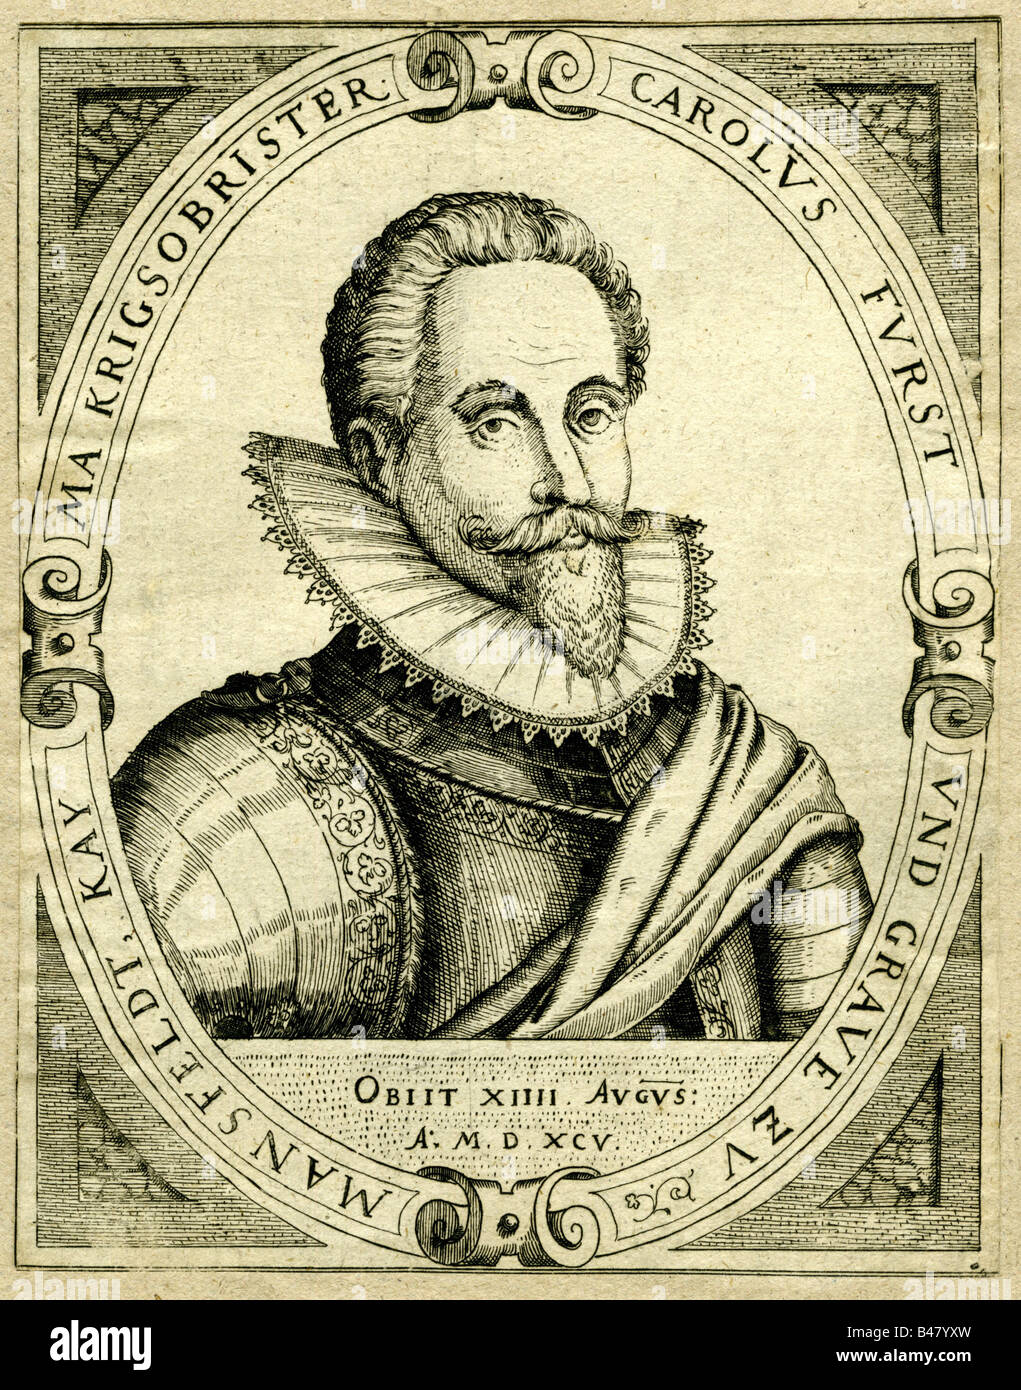 Mansfeld, Karl Count of, 1543 - 24.8.1595, German General and Admiral, portrait, engraving, circa 1600, 16th century, officer in Spanish service, Charles, , Artist's Copyright has not to be cleared Stock Photo